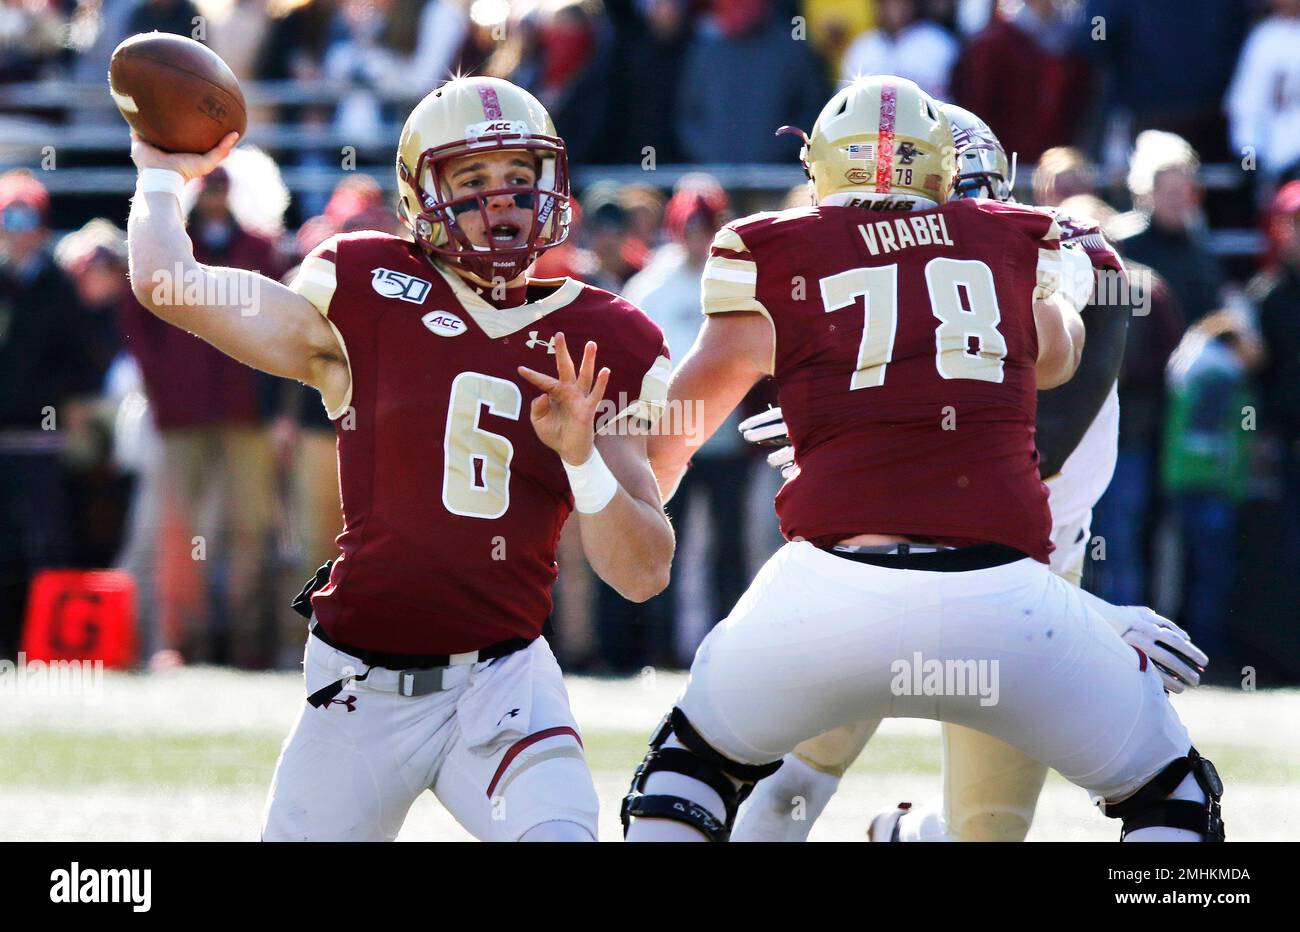 Boston College quarterback Dennis Grosel (6) recovers a fumble as